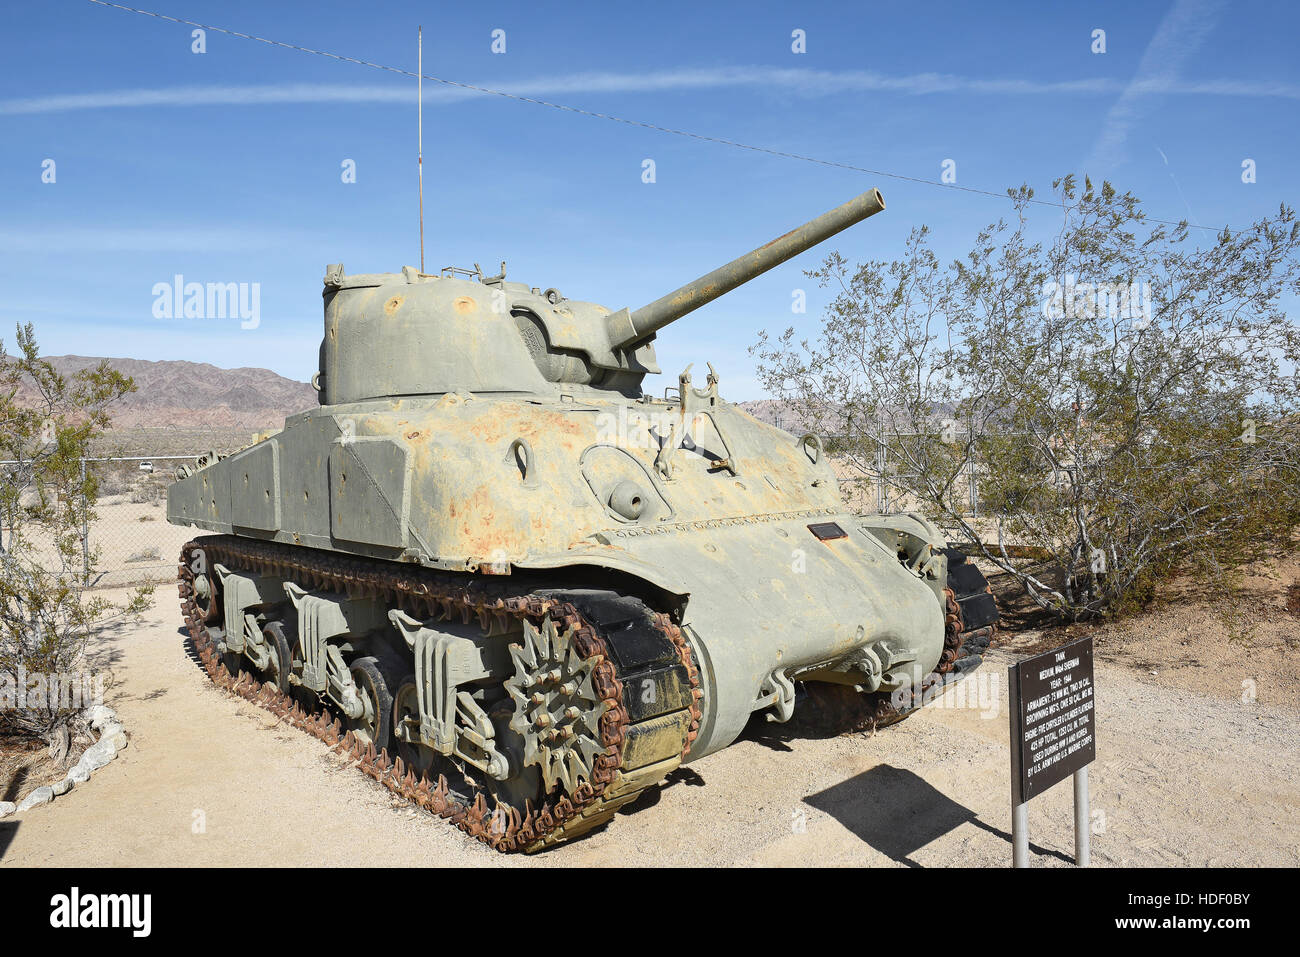 CHIRIACO SUMMIT, CA - DECEMBER 10, 2016: A M4a4 Sherman Tank. The 1944 WWII tank, also used in Korea is on display at the General Patton Stock Photo